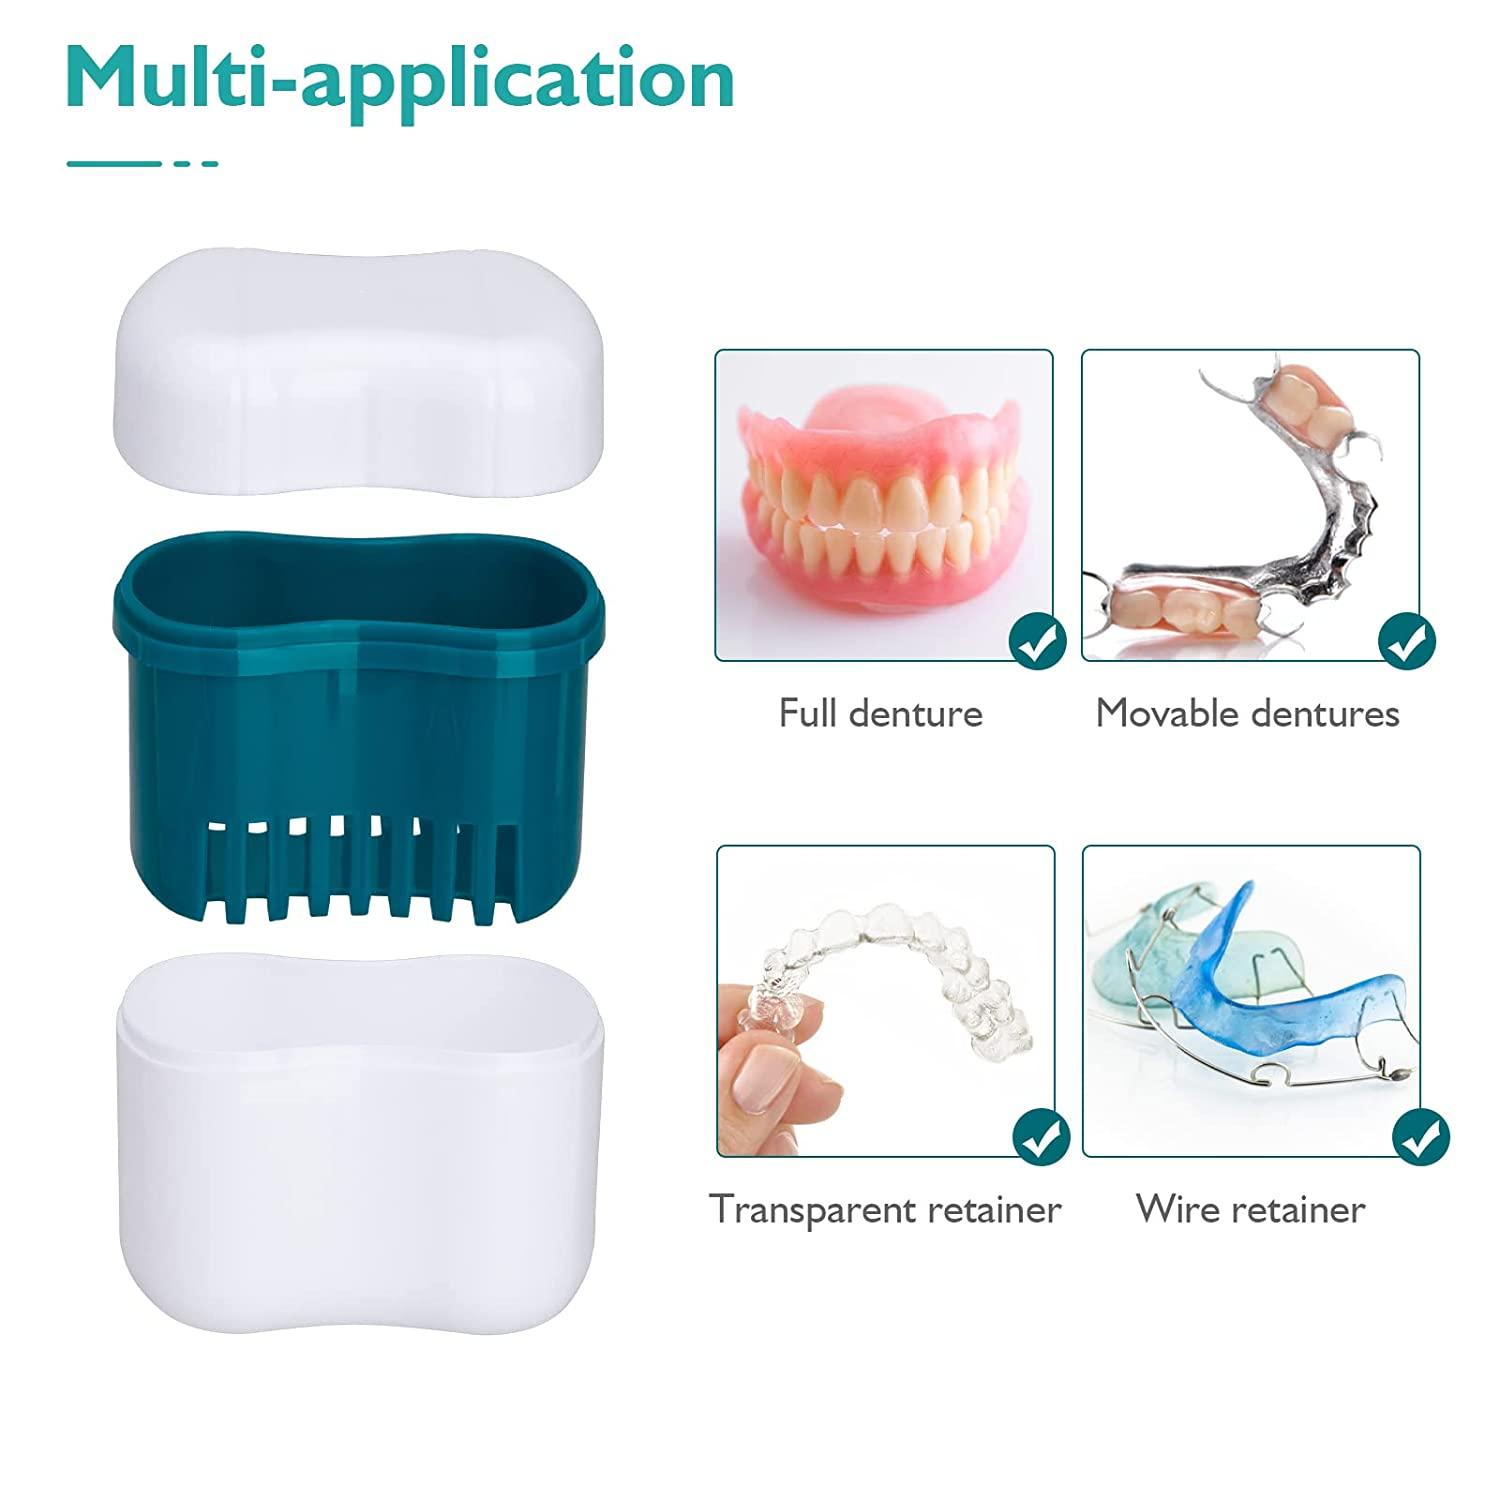 LVCHEN Denture Cleaning Case - Soaking Cup False Teeth Container Denture  Storage Case with Strainer Basket for Travel Cleaning Complete Clean Care  for Dentures and Clear Braces